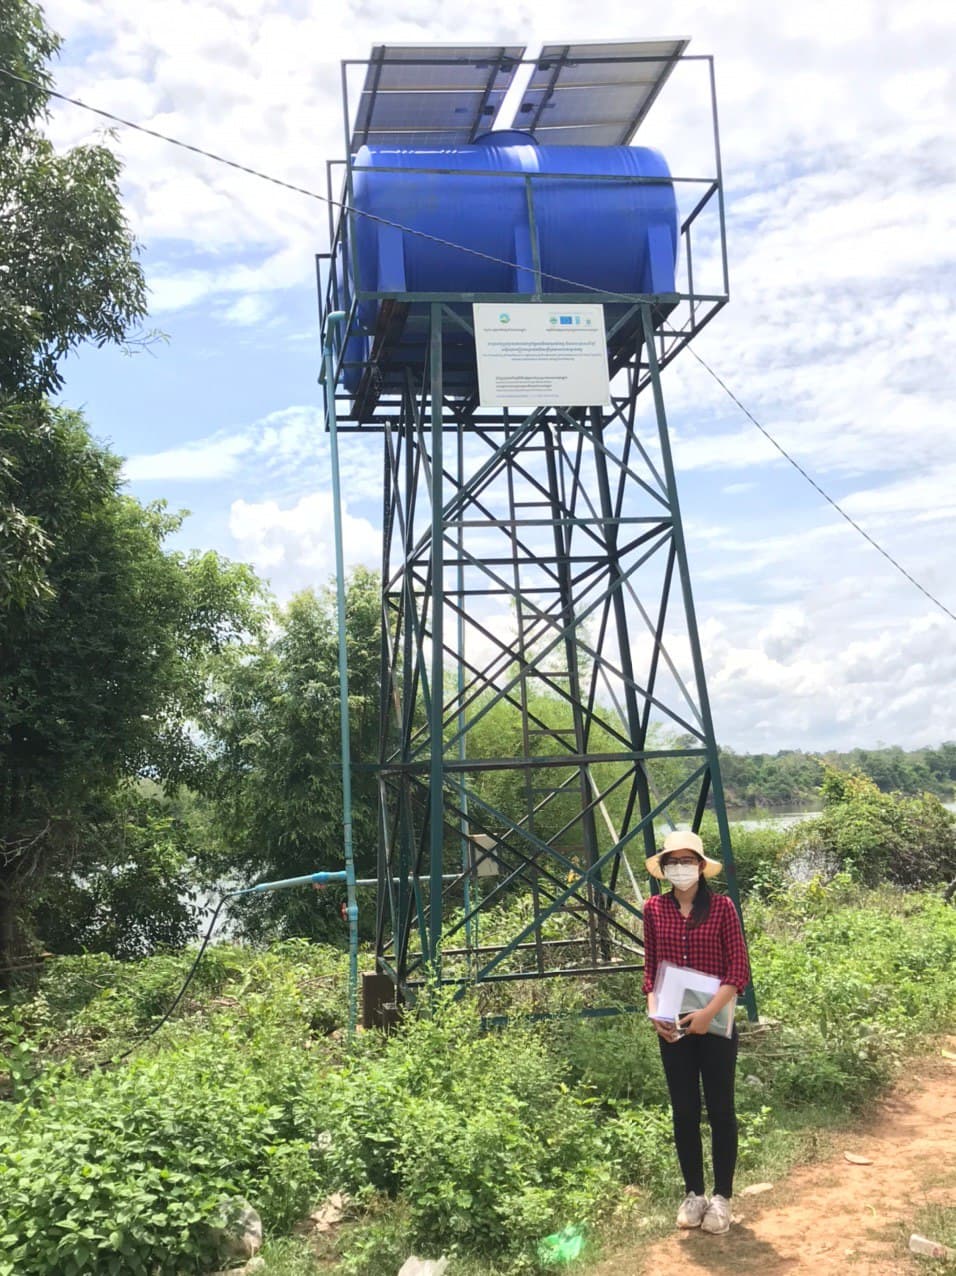 Mariny from the EWB Australia team in Cambodia with the solar-powered water supply system